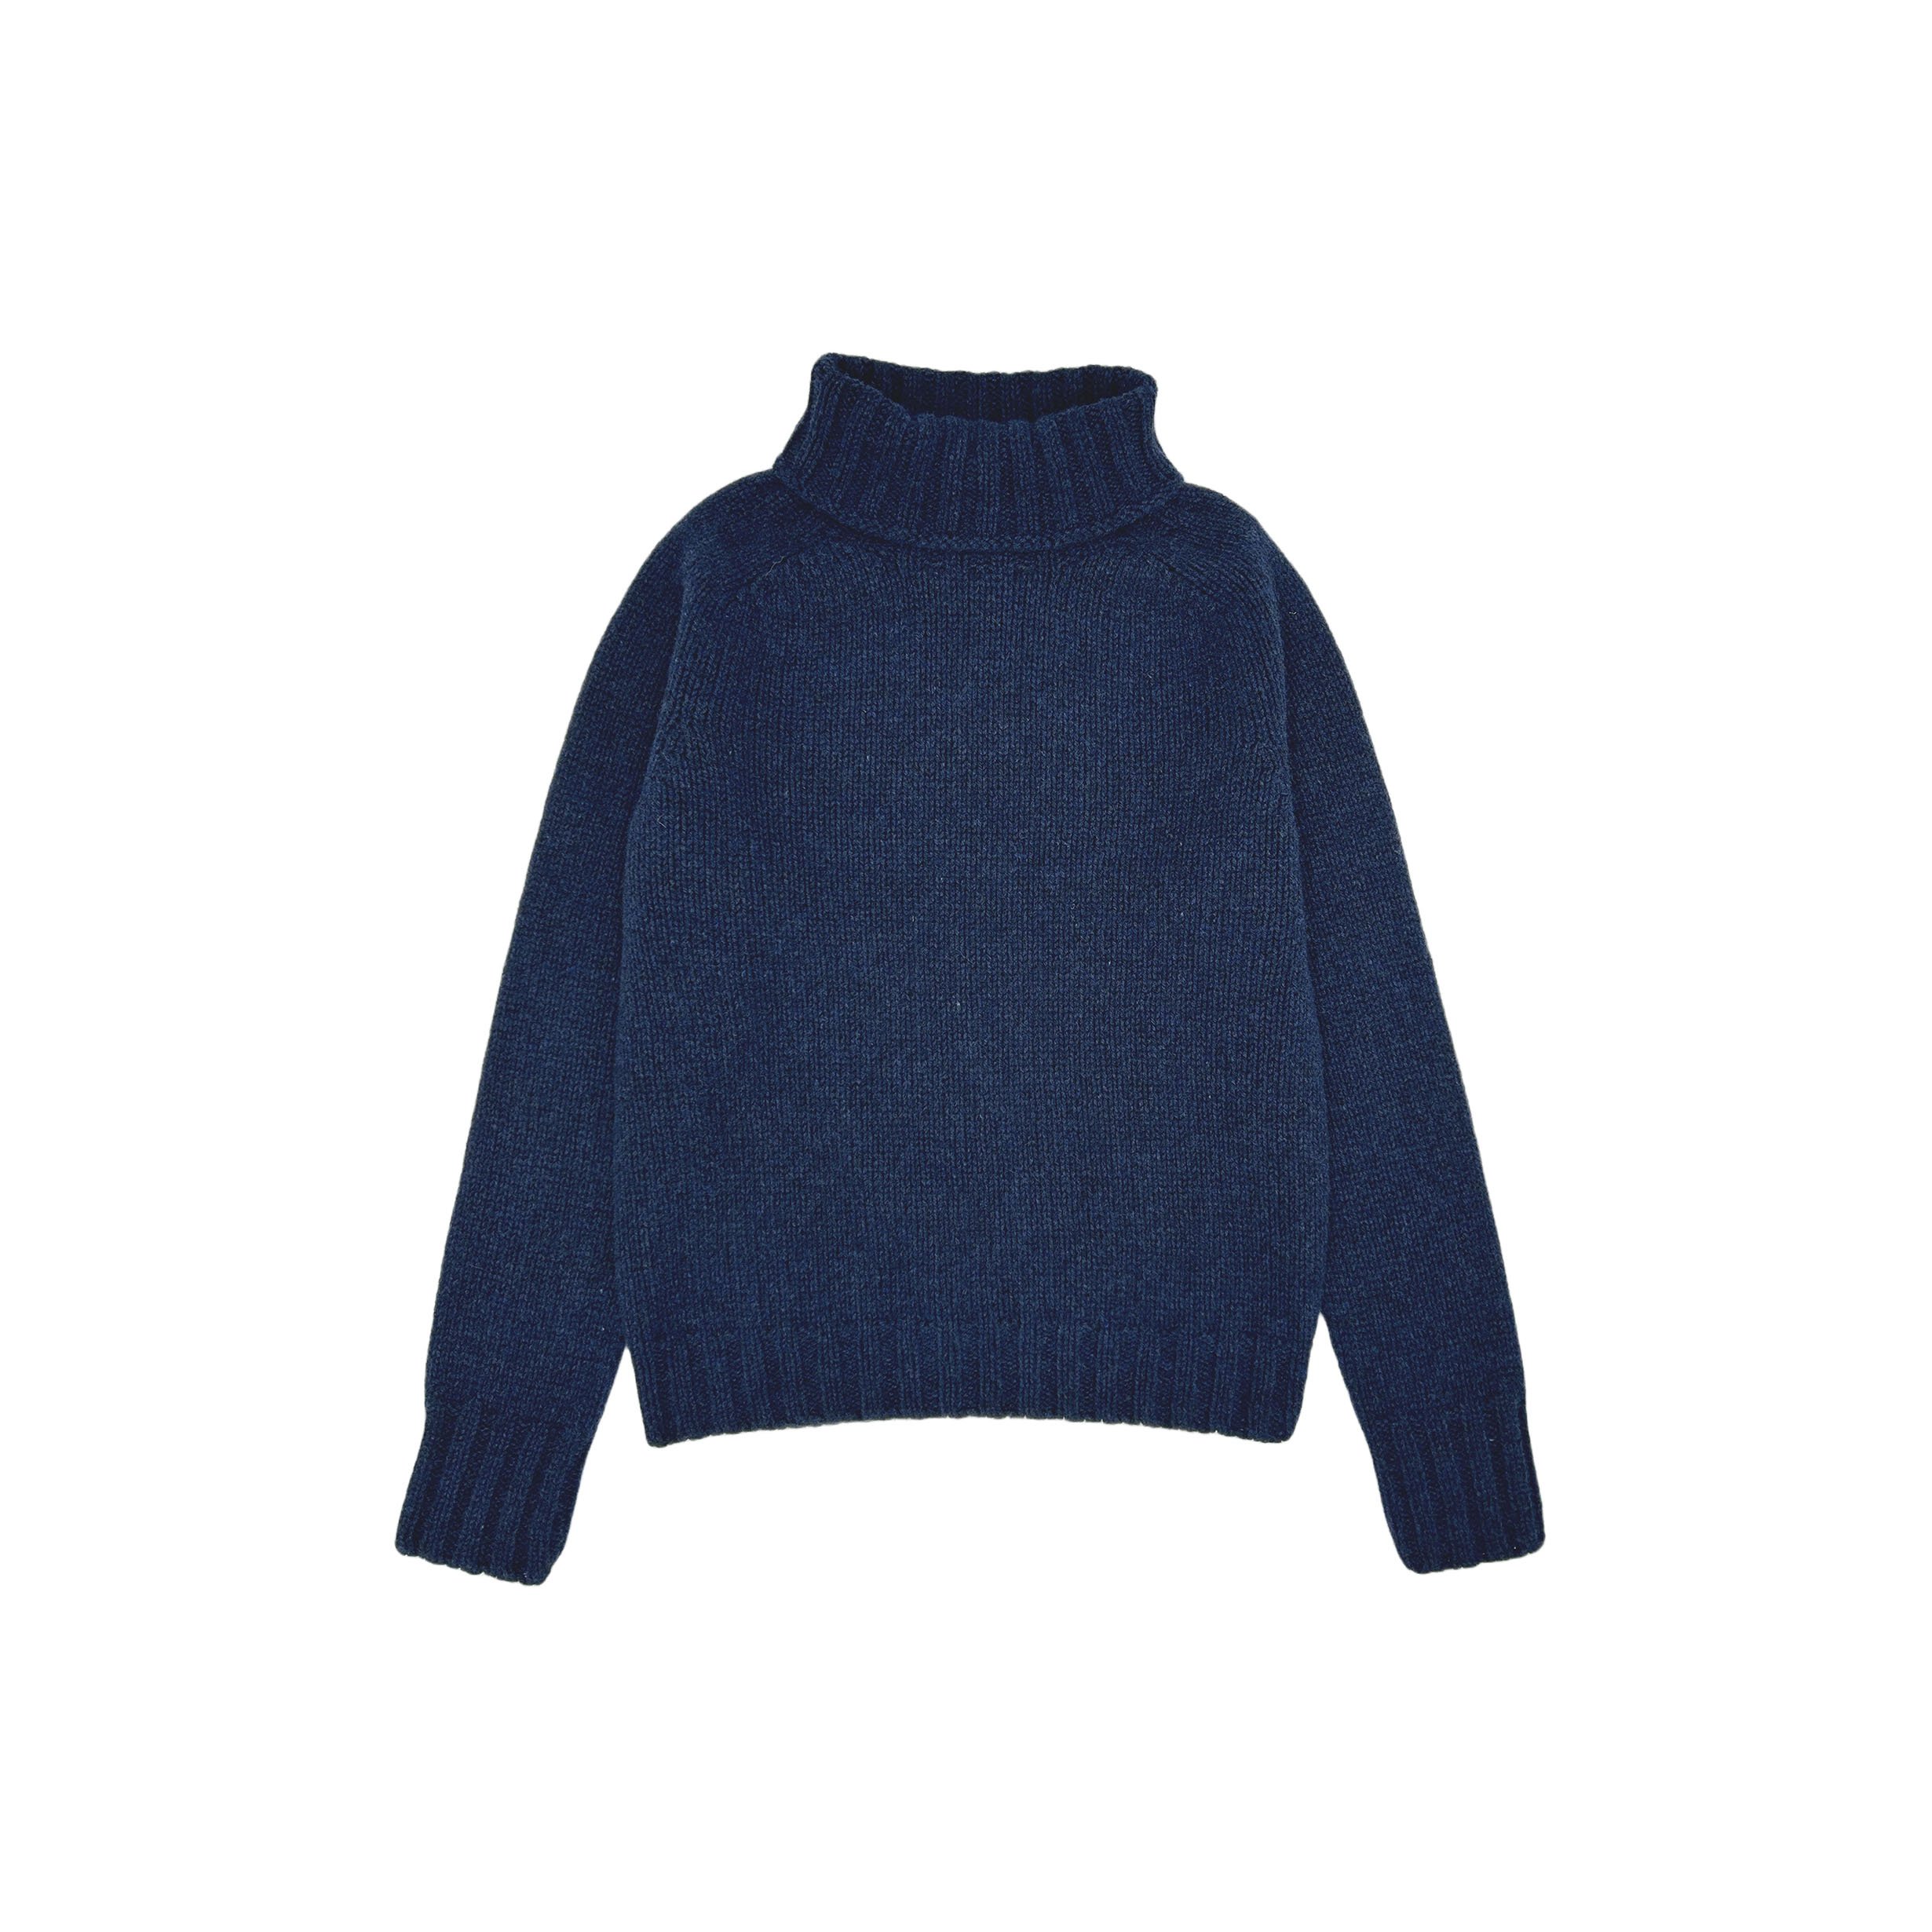 An image of Big Softy' Sweater - 5 Colours - Large/Coyote